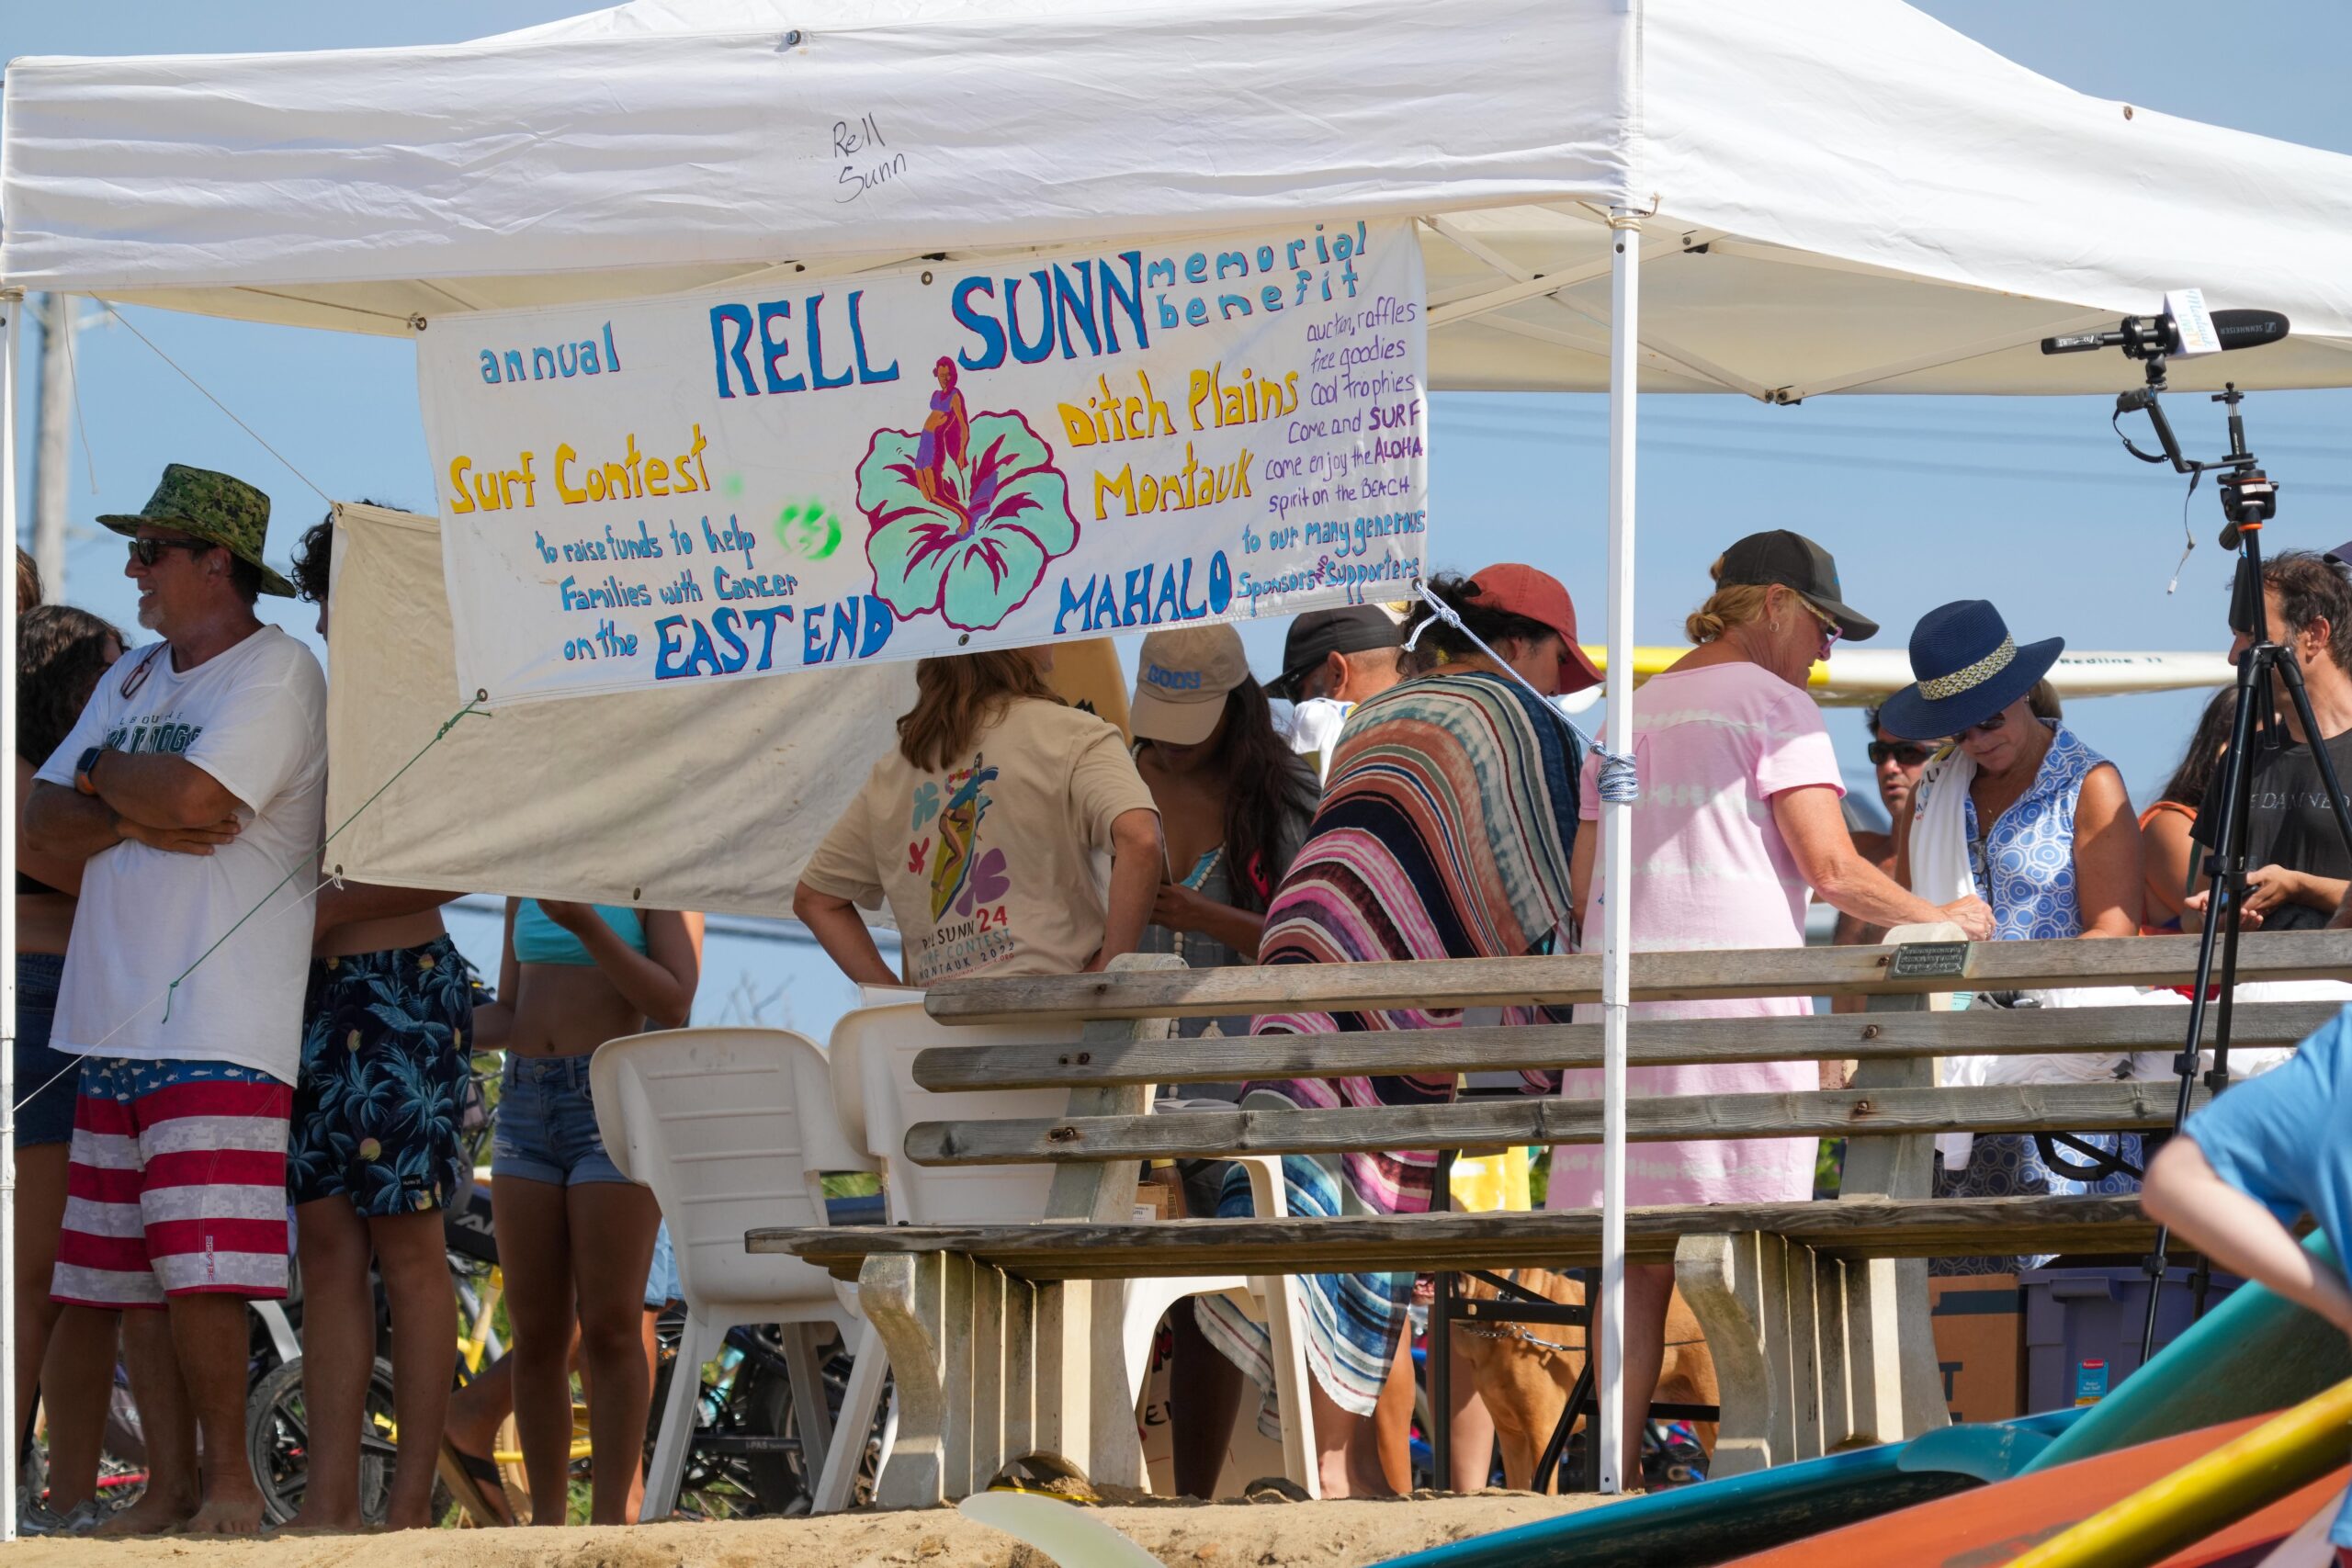 The 24th annual Rell Sunn Memorial Surf Contest was this past Saturday morning at Ditch Plains.    RON ESPOSITO